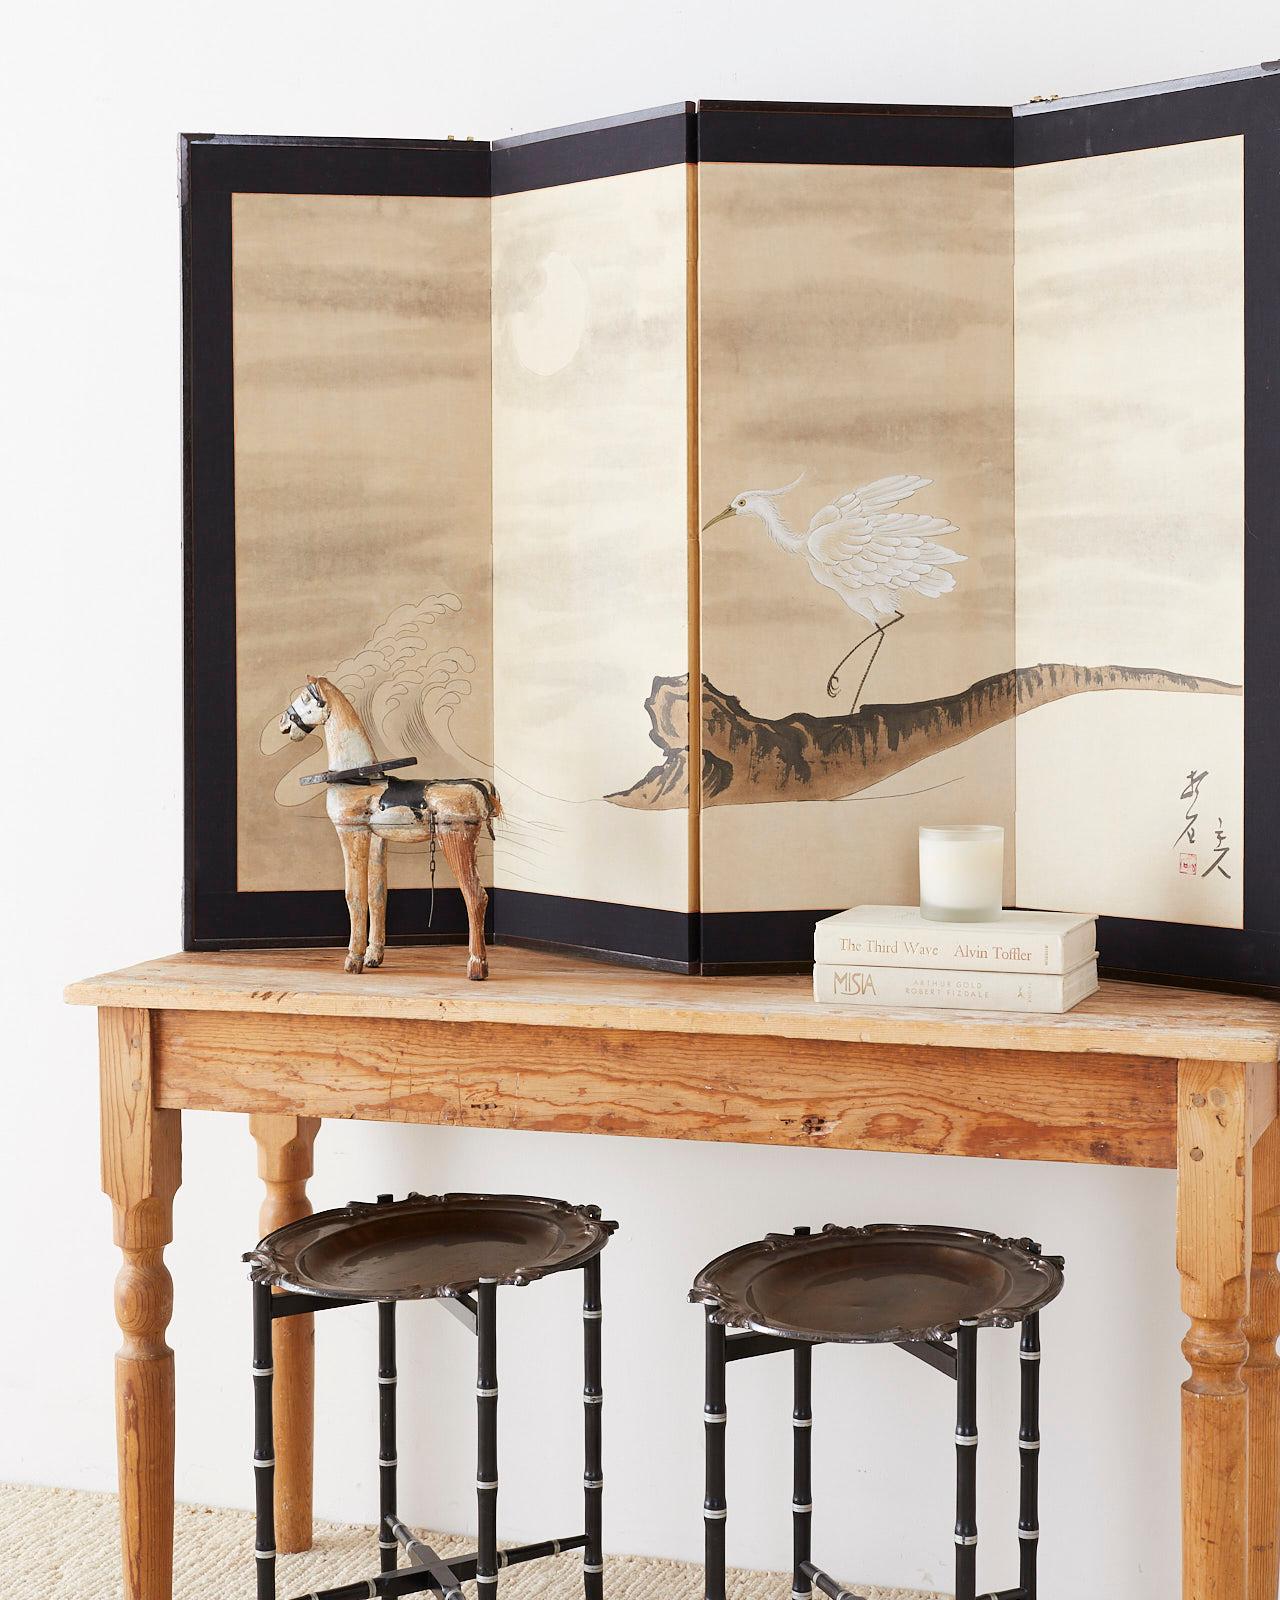 Modern style Japanese four-panel folding byobu screen depicting a white egret with crashing waves under a full moon. Painted with ink and color on textured paper. Signed on right side by artist Shoshi with a seal. Set in a lacquered wood frame with